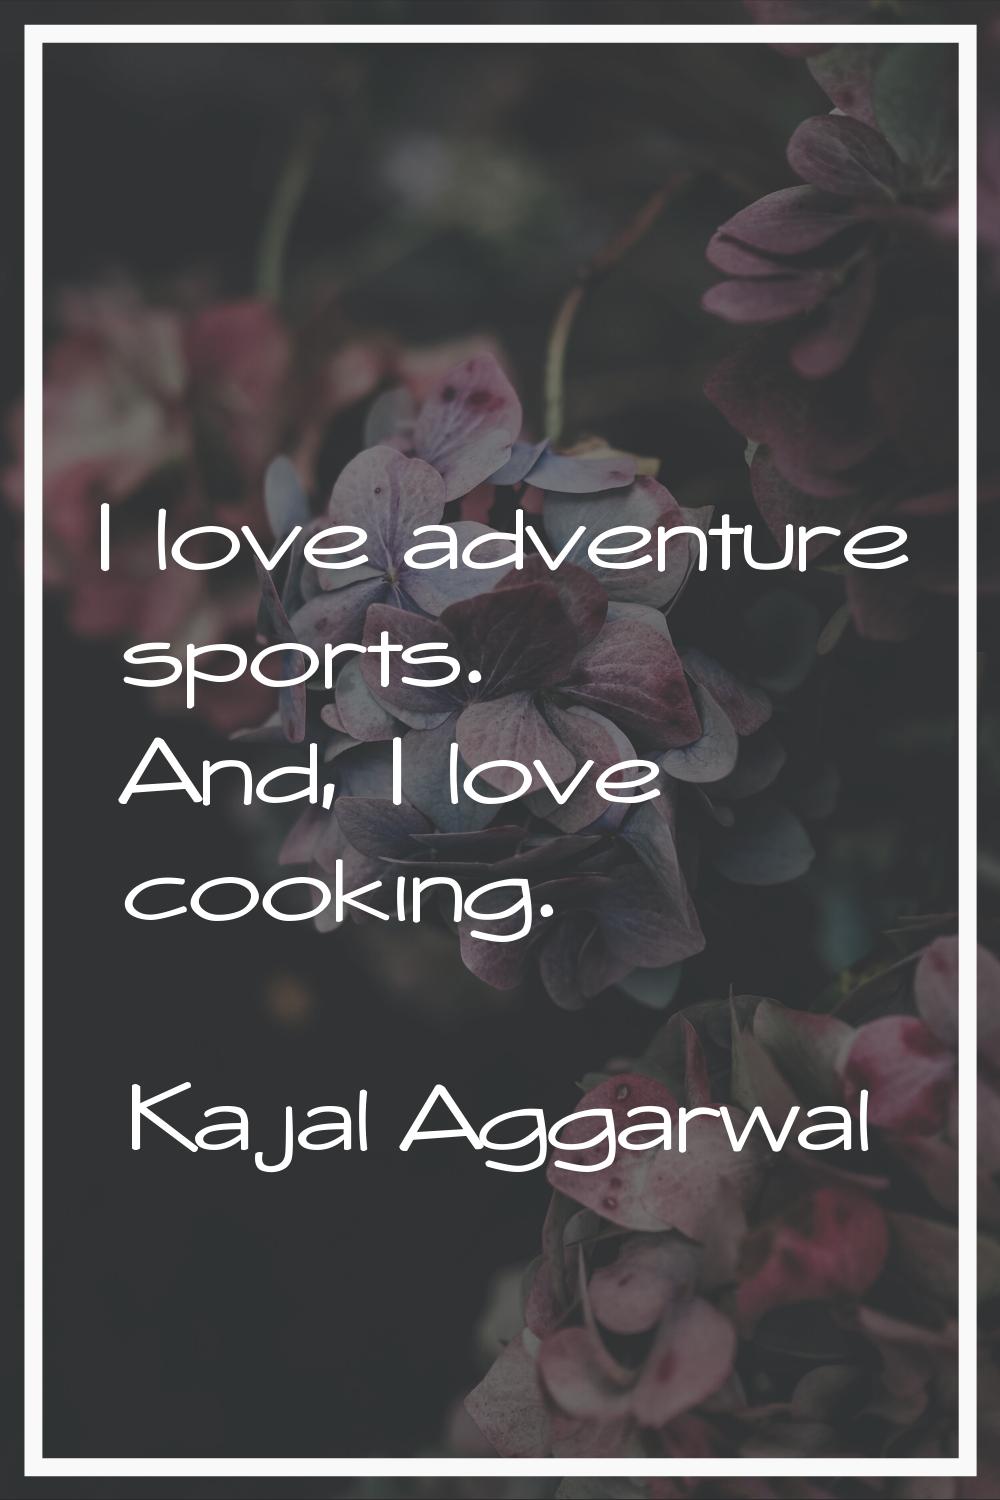 I love adventure sports. And, I love cooking.